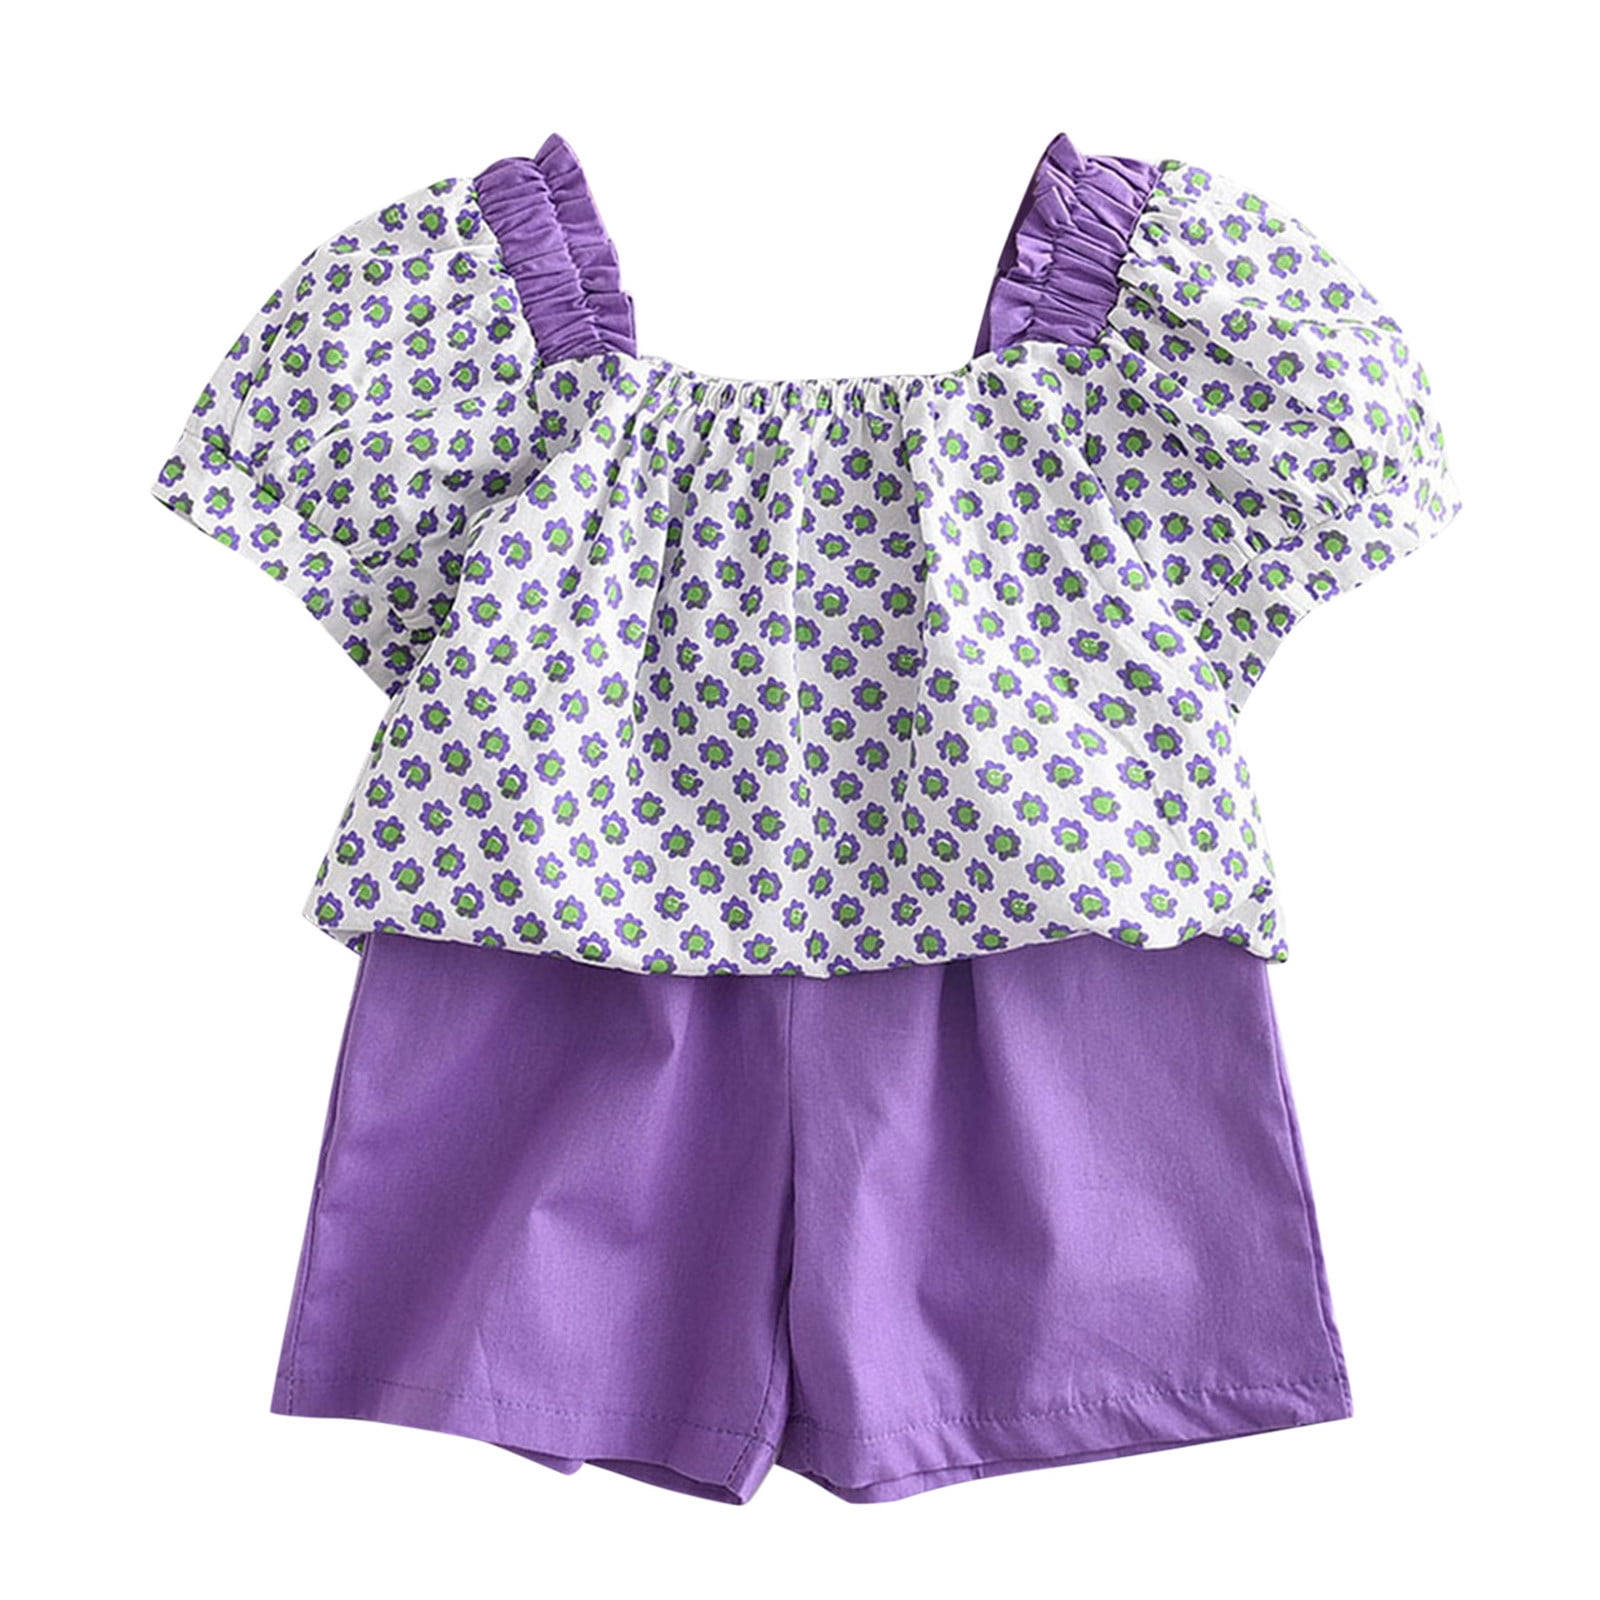 Girl Outfits Girls Clothes Size 14-16 Toddler Kids Baby Girls